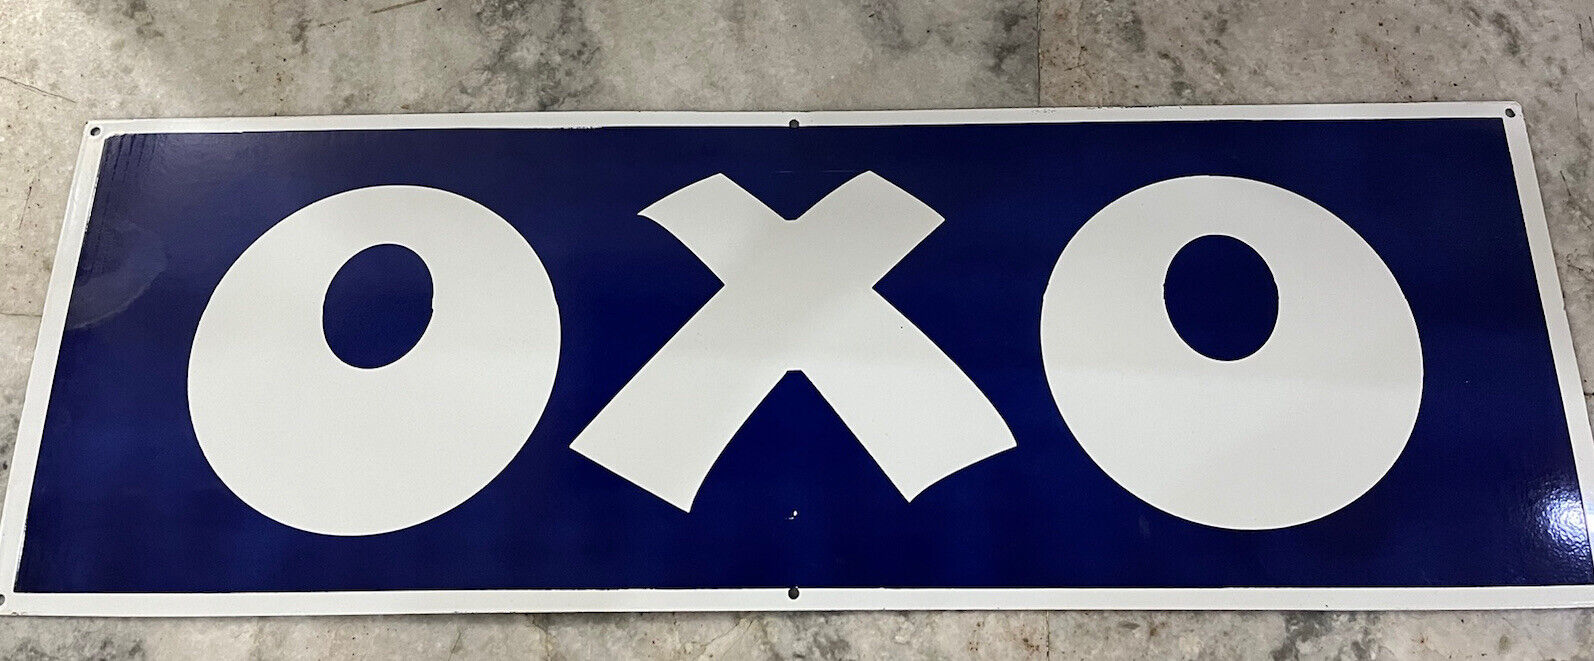 VINTAGE OXO PORCELAIN ENAMEL SIGN 36 INCHES BY 12 INCHES